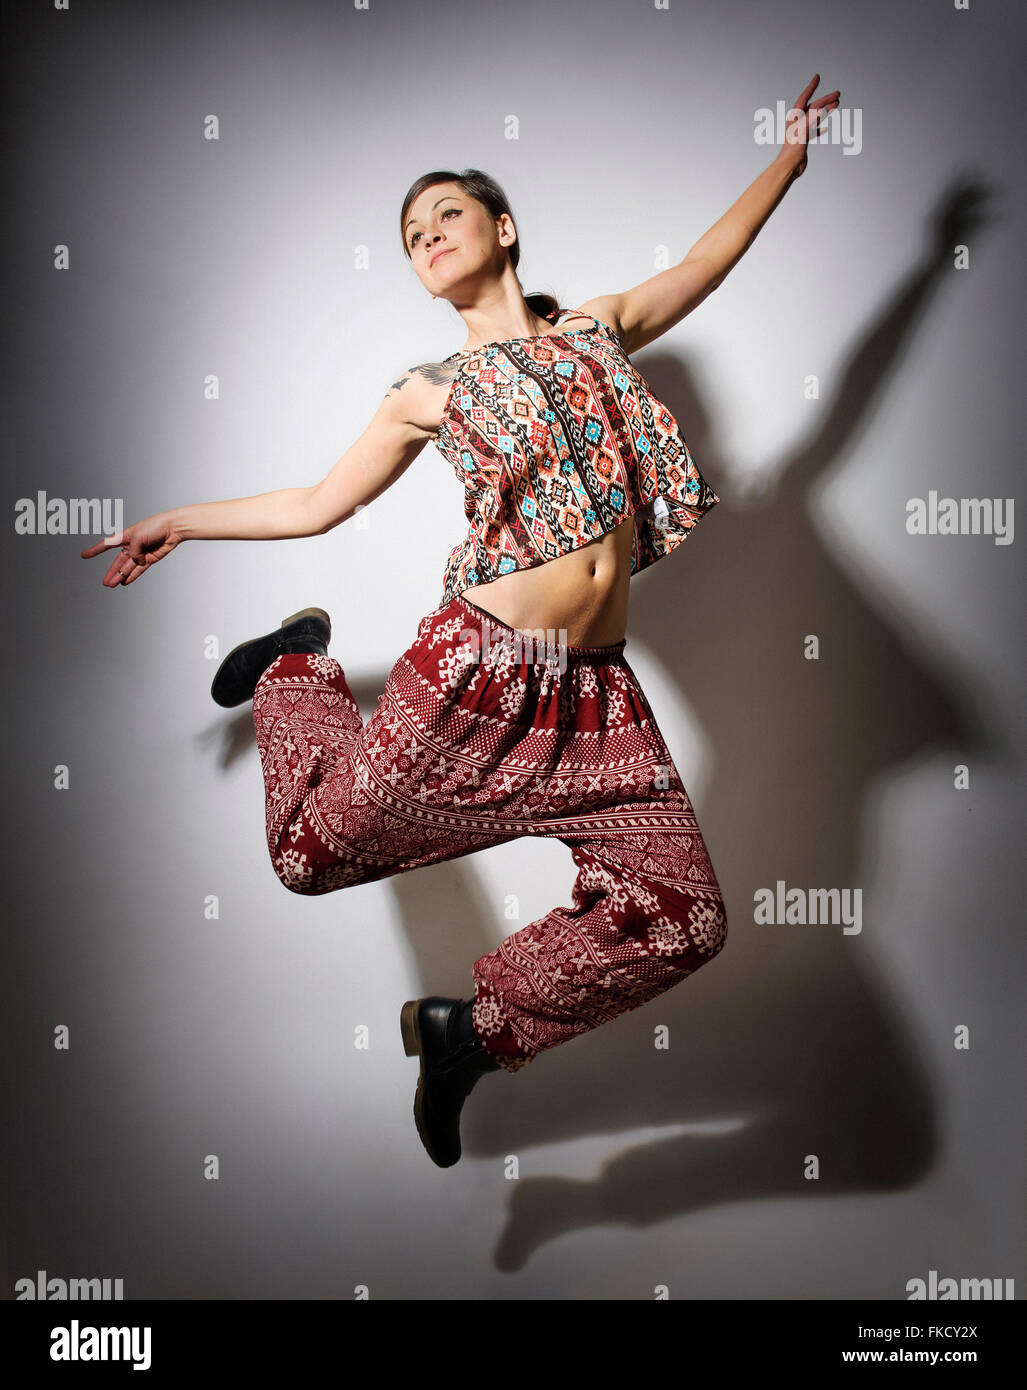 Young woman jumping against white background Stock Photo